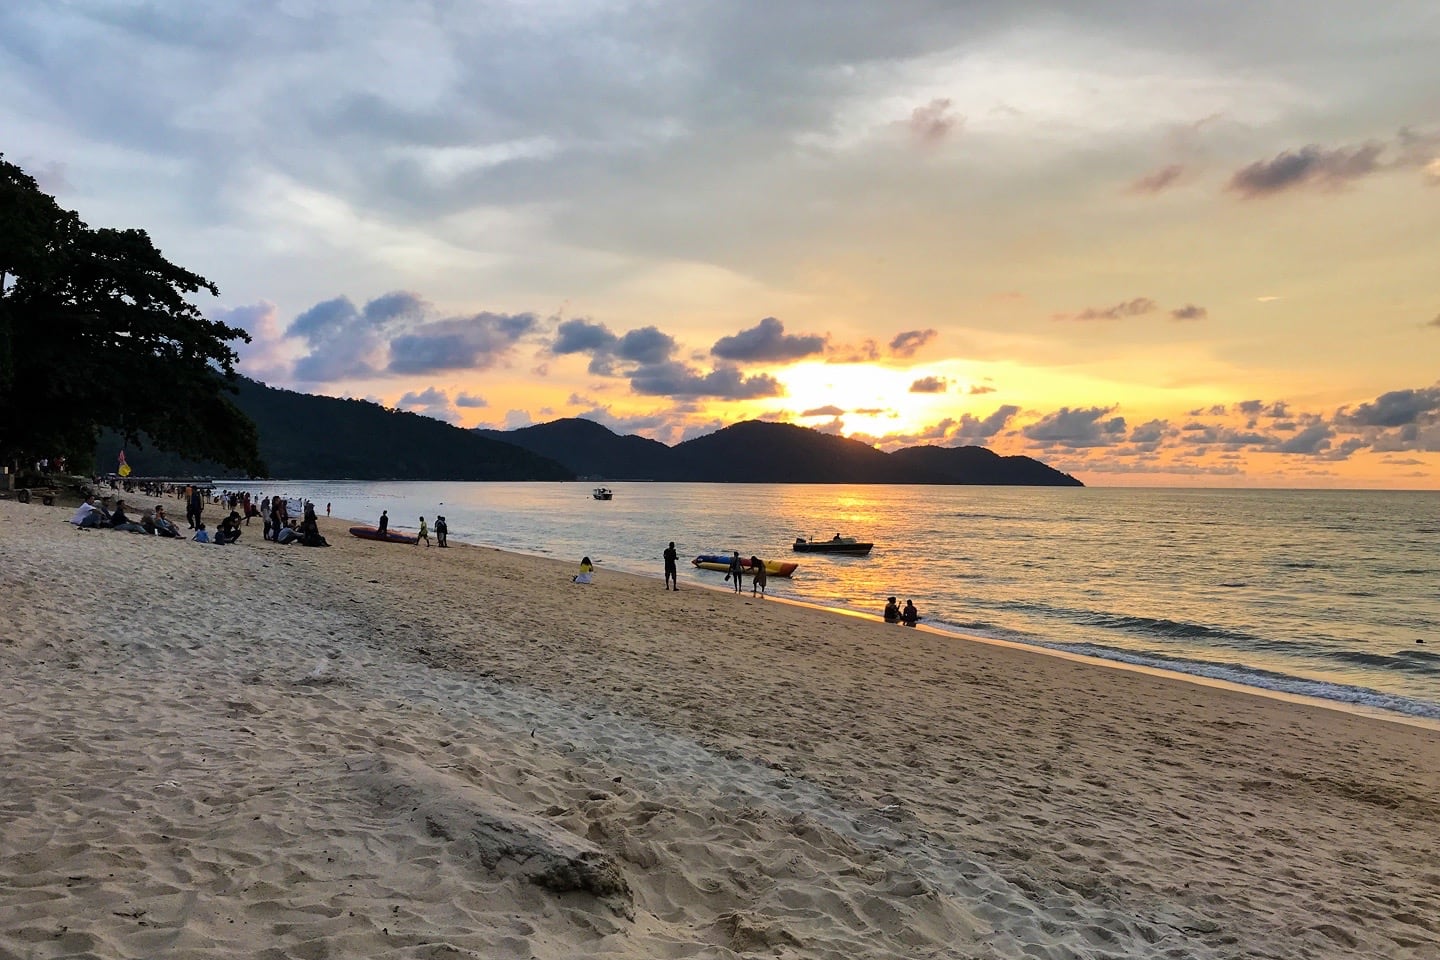 Batu Ferringhi Beach Penang: What to Expect from Your Visit